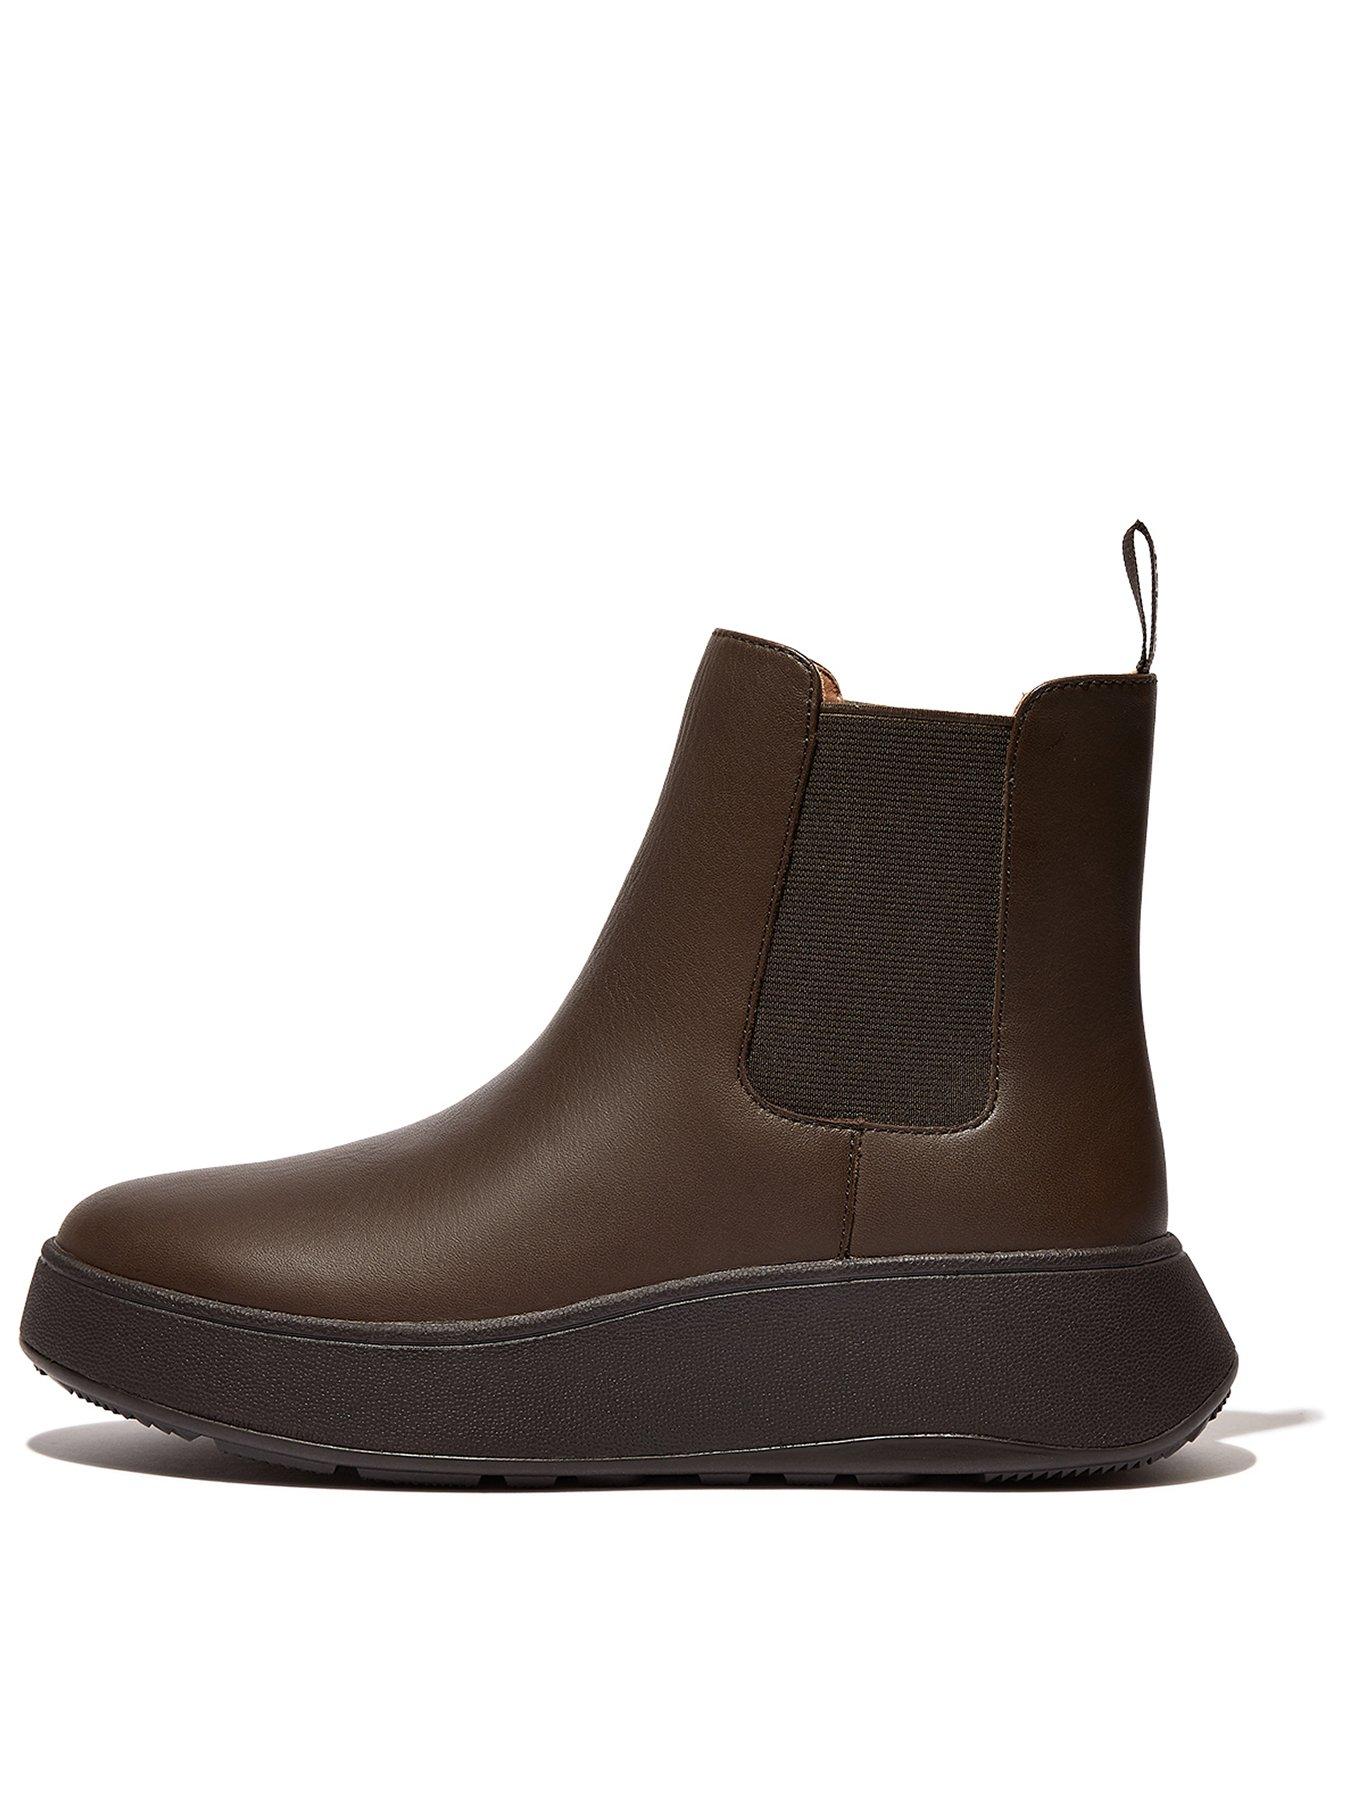 FitFlop F-mode Leather Flatform Chelsea Boots | very.co.uk